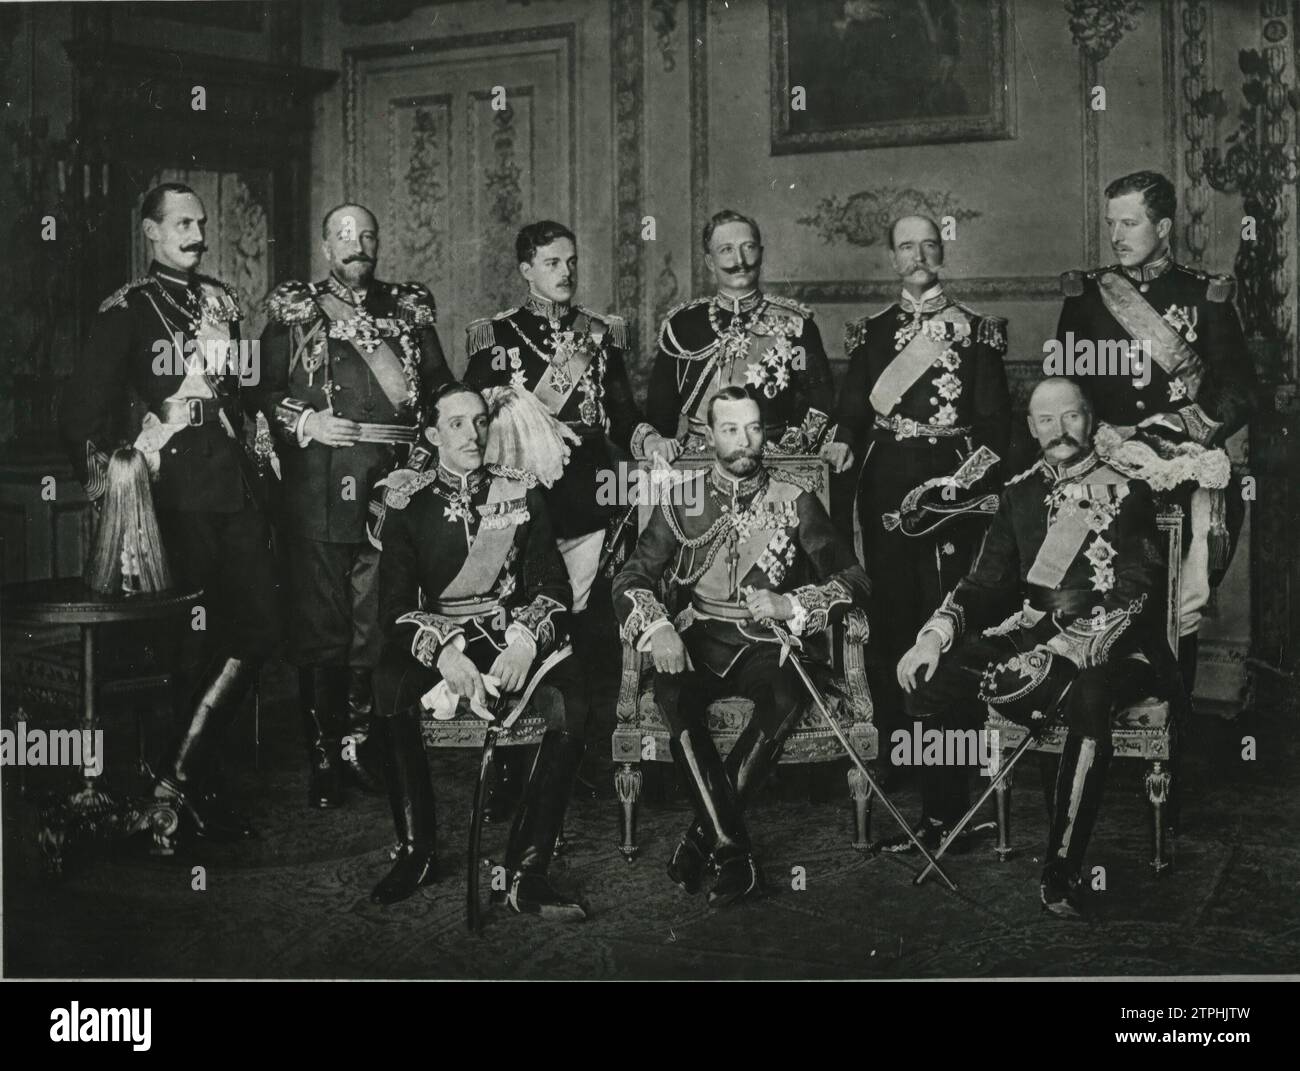 04/30/1910. At Buckingham Palace On the death of Edward VII. Seated, Alfonso Xiii, George V of England, and Frederick Viii of Denmark. Standing, Haakon VII of Norway, Ferdinand I of Bulgaria, Manuel Ii of Portugal, William Ii of Germany, George I of Greece and Albert I of Belgium. Credit: Album / Archivo ABC Stock Photo